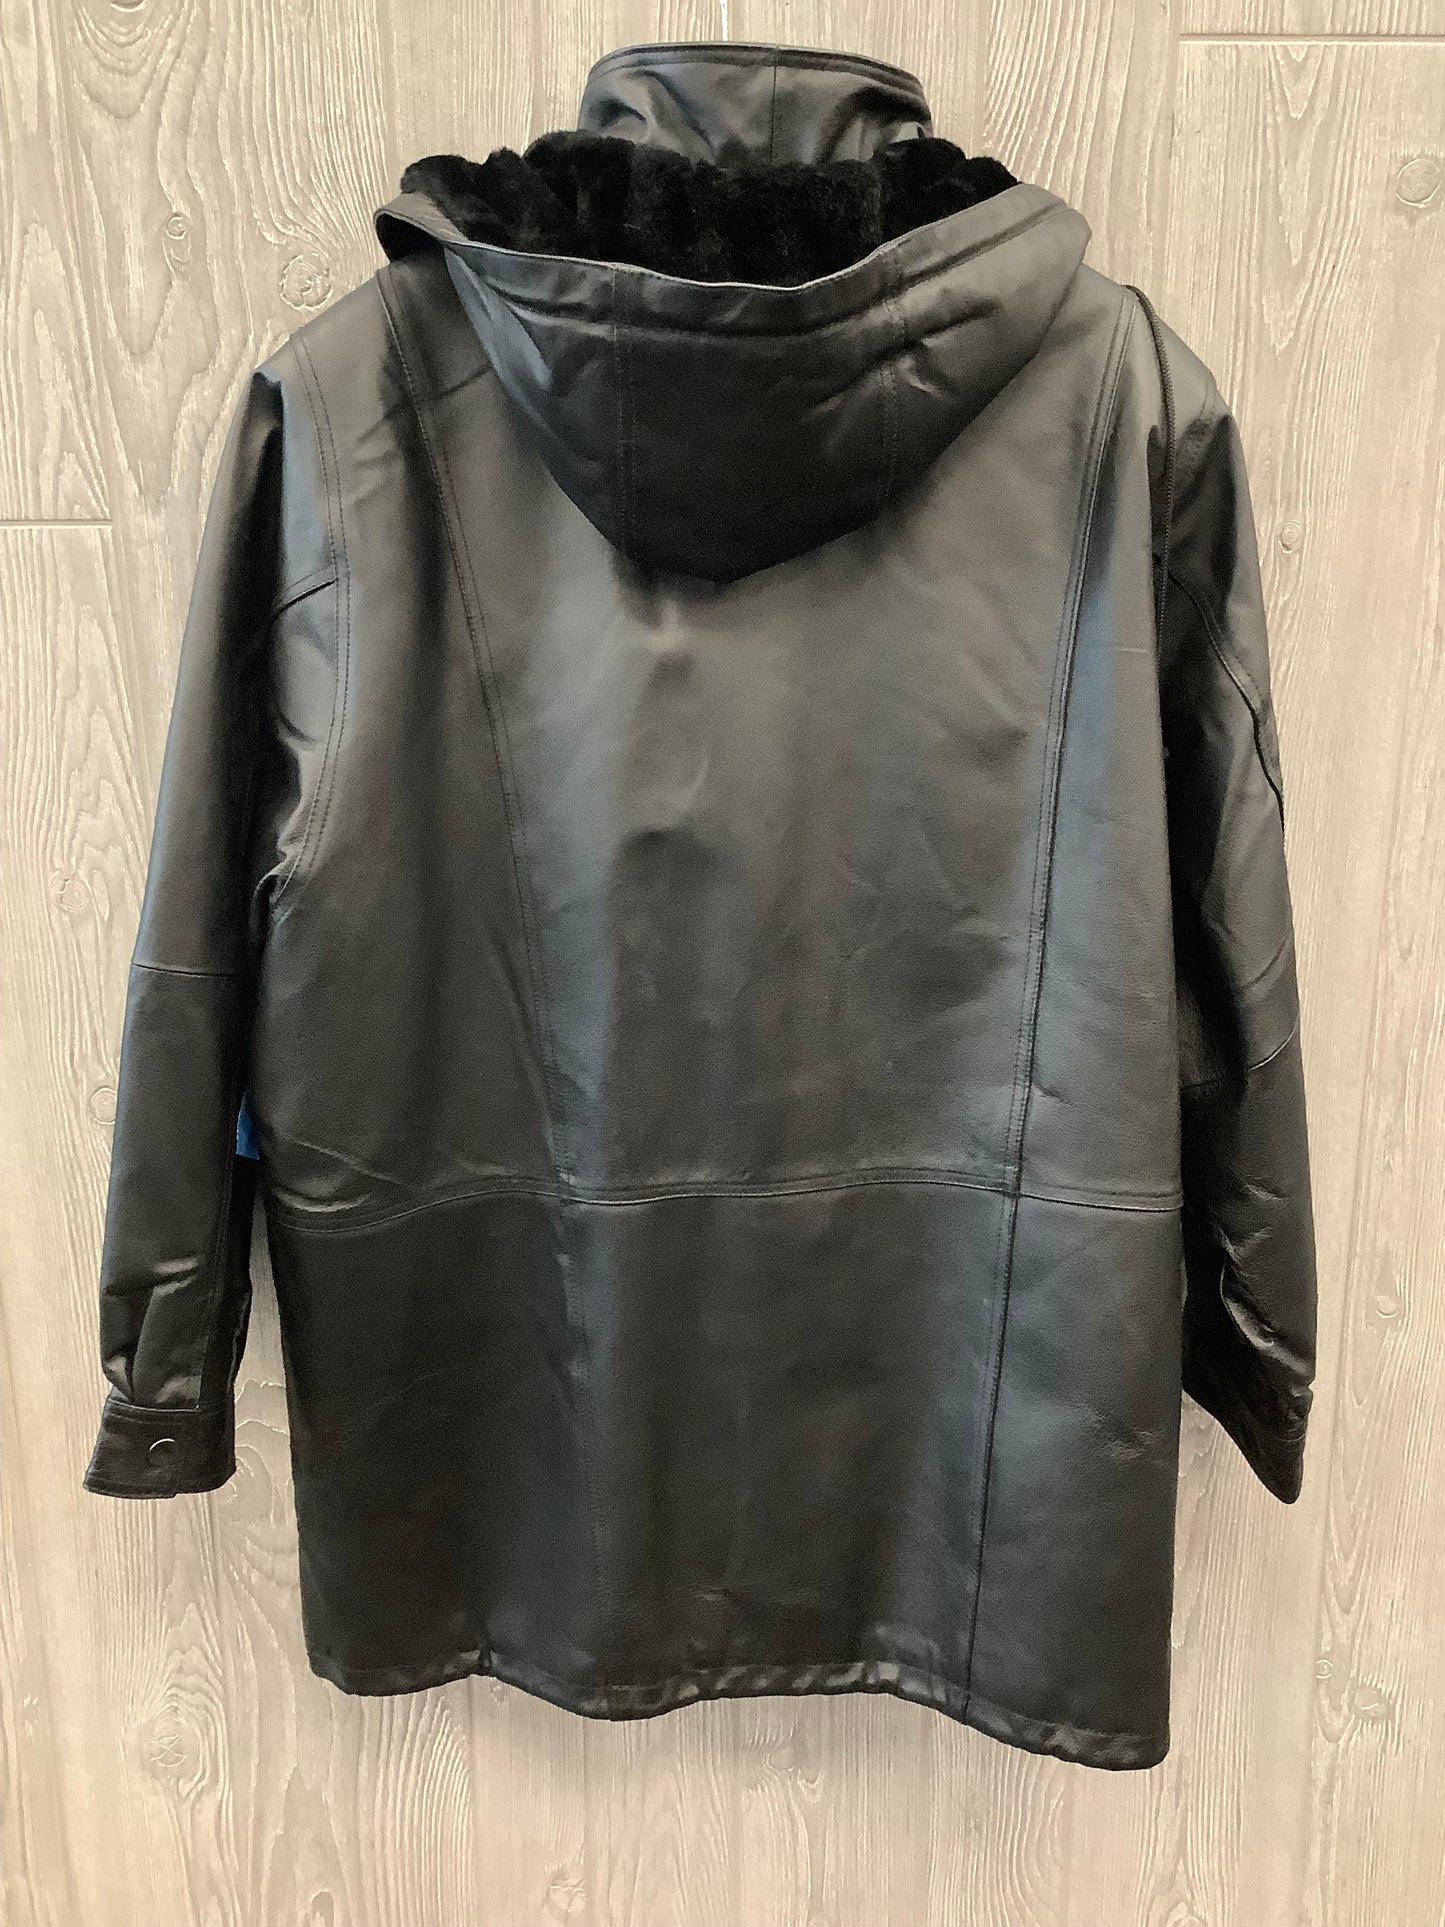 Coat Leather By Croft And Barrow  Size: 1x